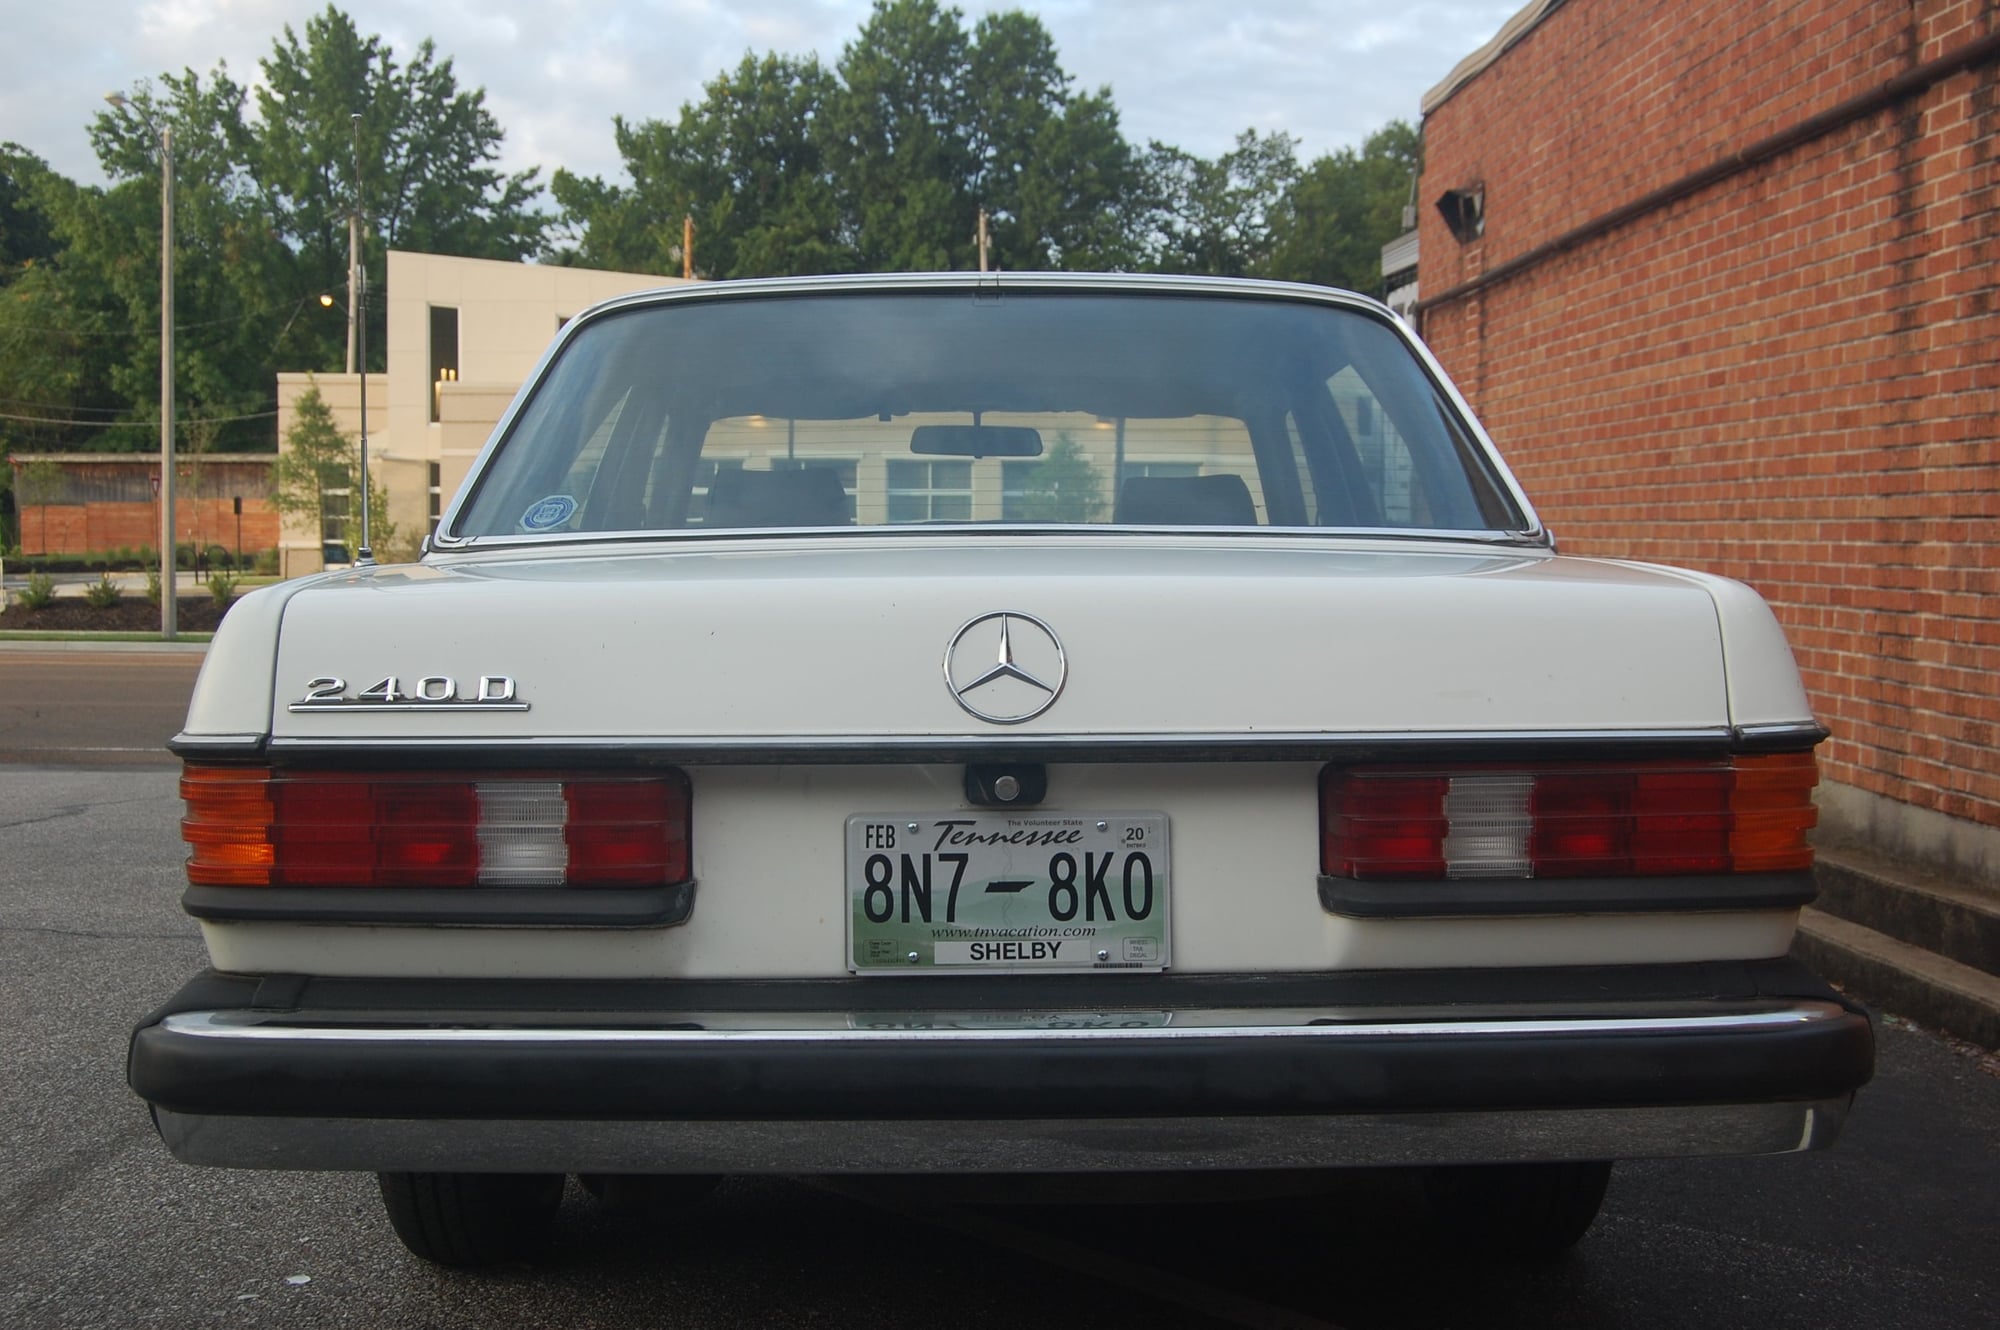 1981 Mercedes-Benz 240D - 1981 Mercedes-Benz 240D Great Driver - Used - VIN WDB23A0BB269197 - 184,000 Miles - 4 cyl - 2WD - Automatic - Sedan - White - Memphis, TN 38117, United States